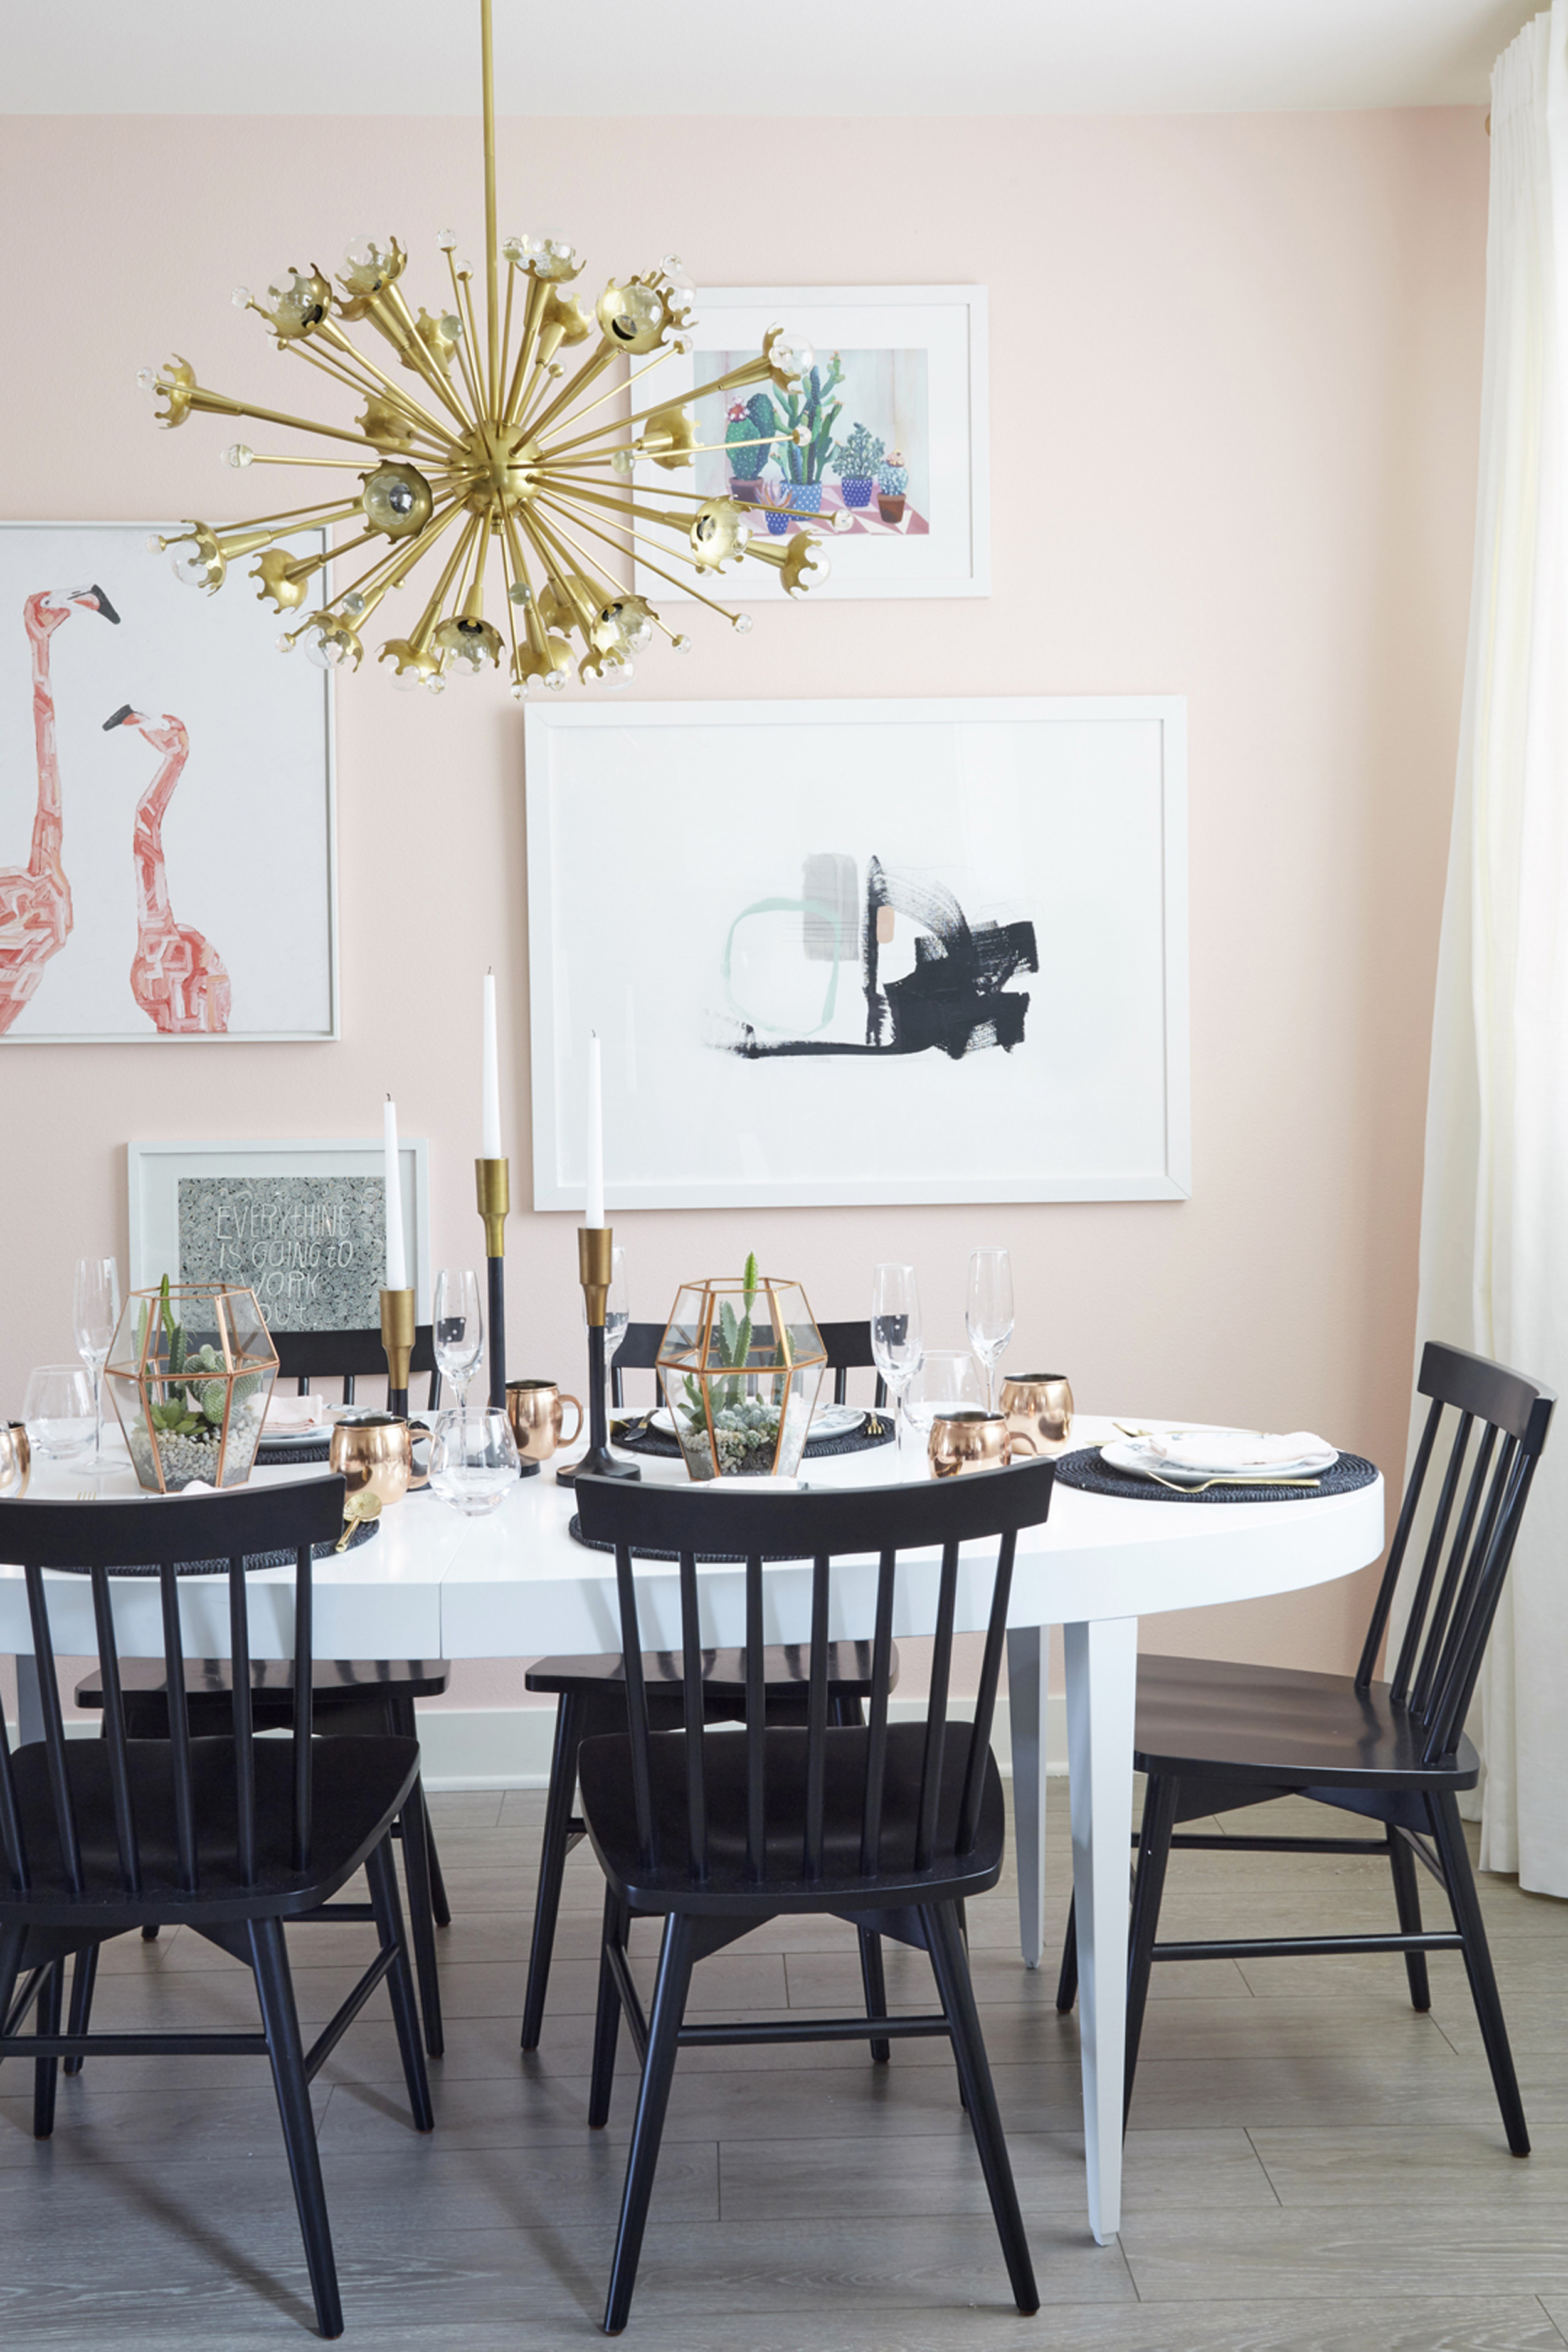 Dining Room Rules The Cheat Sheet You've Been Waiting For 3